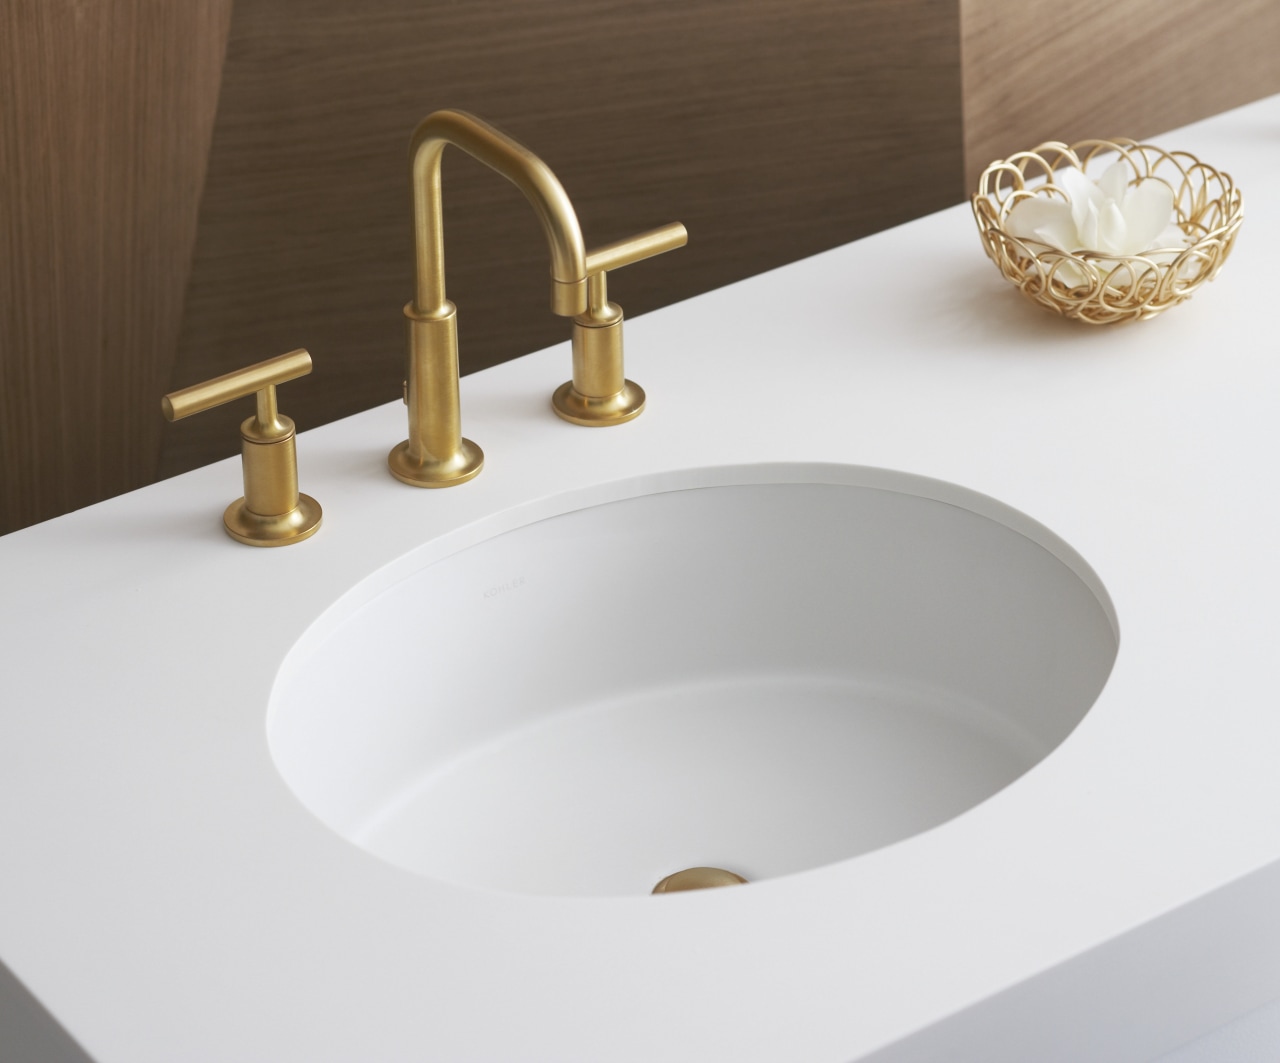 View of a Kohler basin with gold faucets bathroom sink, ceramic, plumbing fixture, product design, sink, tap, white, brown